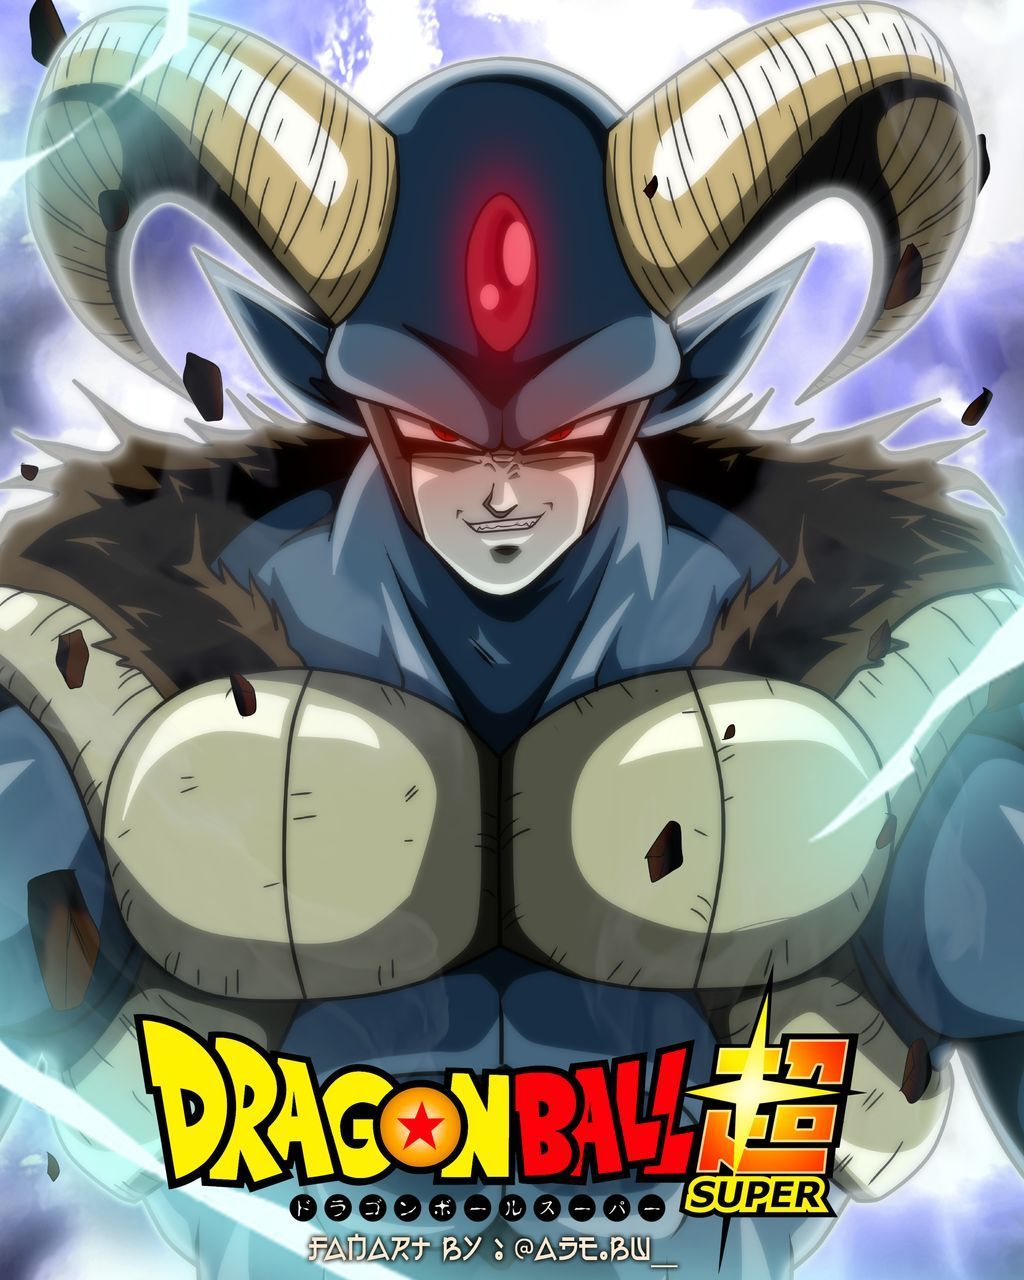 Moro DBS (After absorbing 73). Dragon ball super manga, Dragon ball image, Dragon ball art